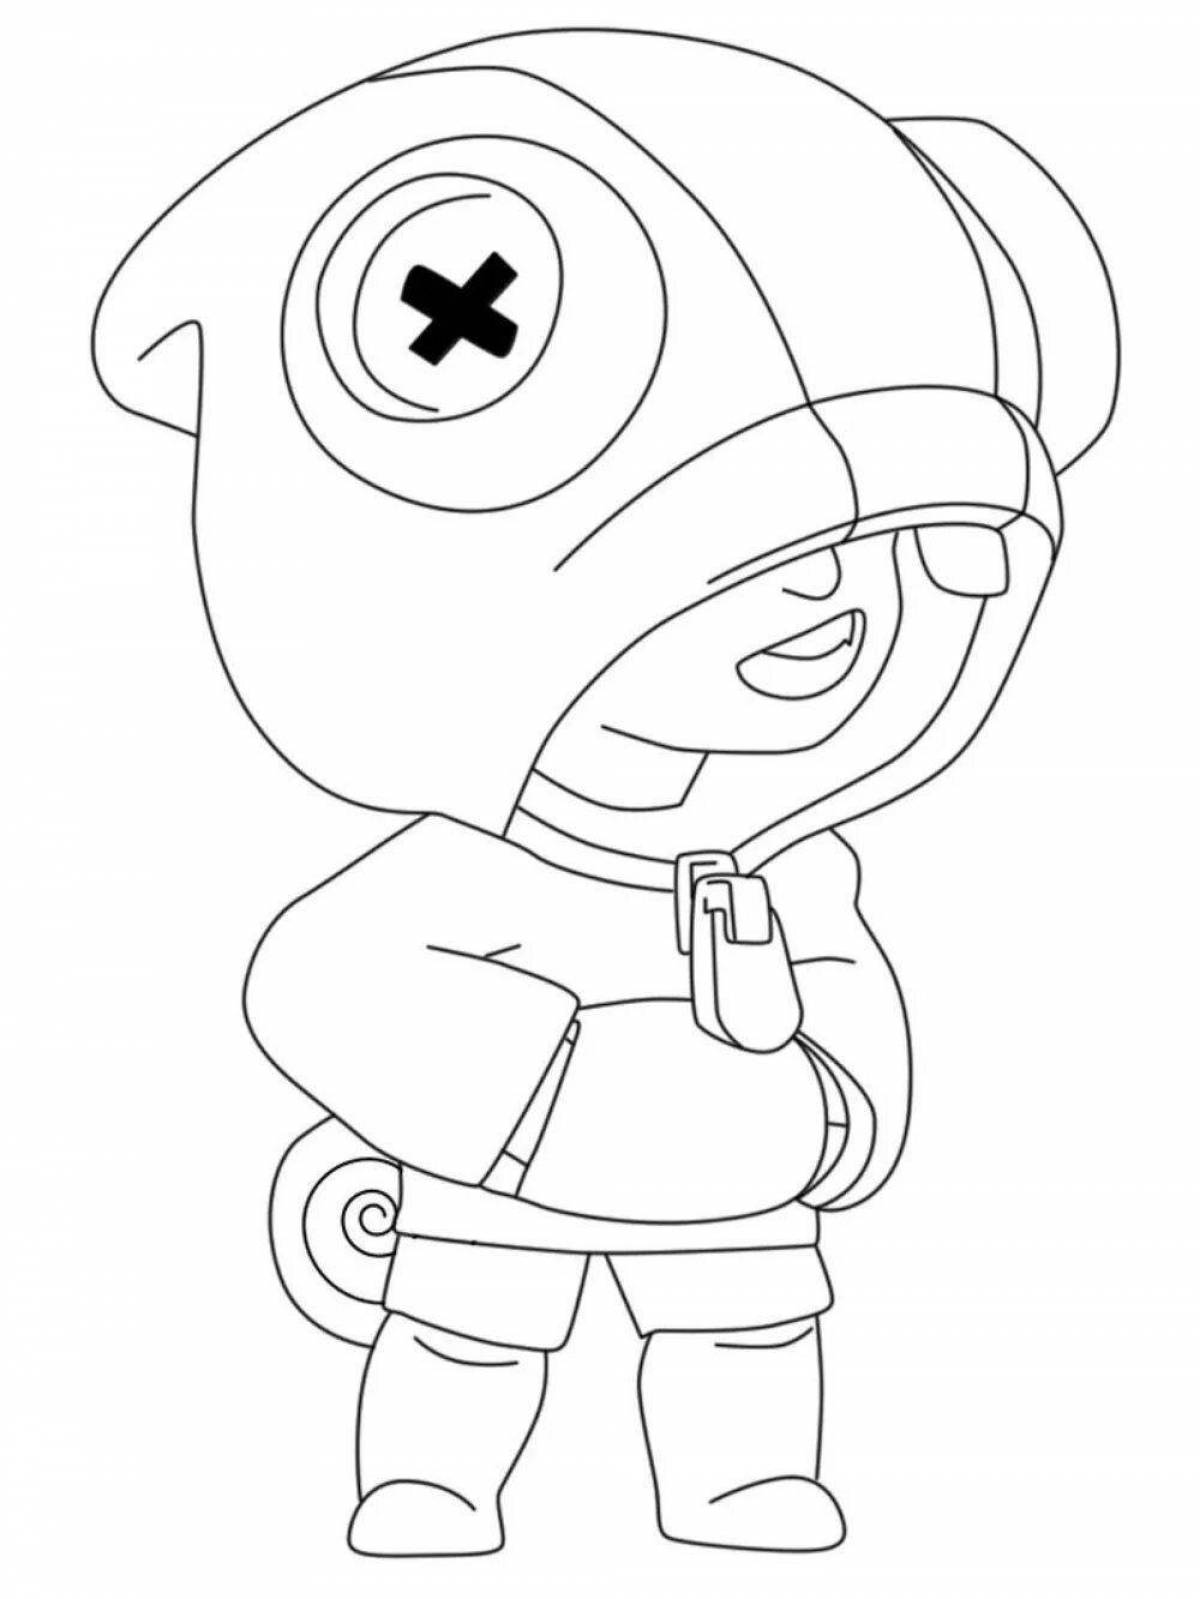 Great braver stars coloring pages for kids